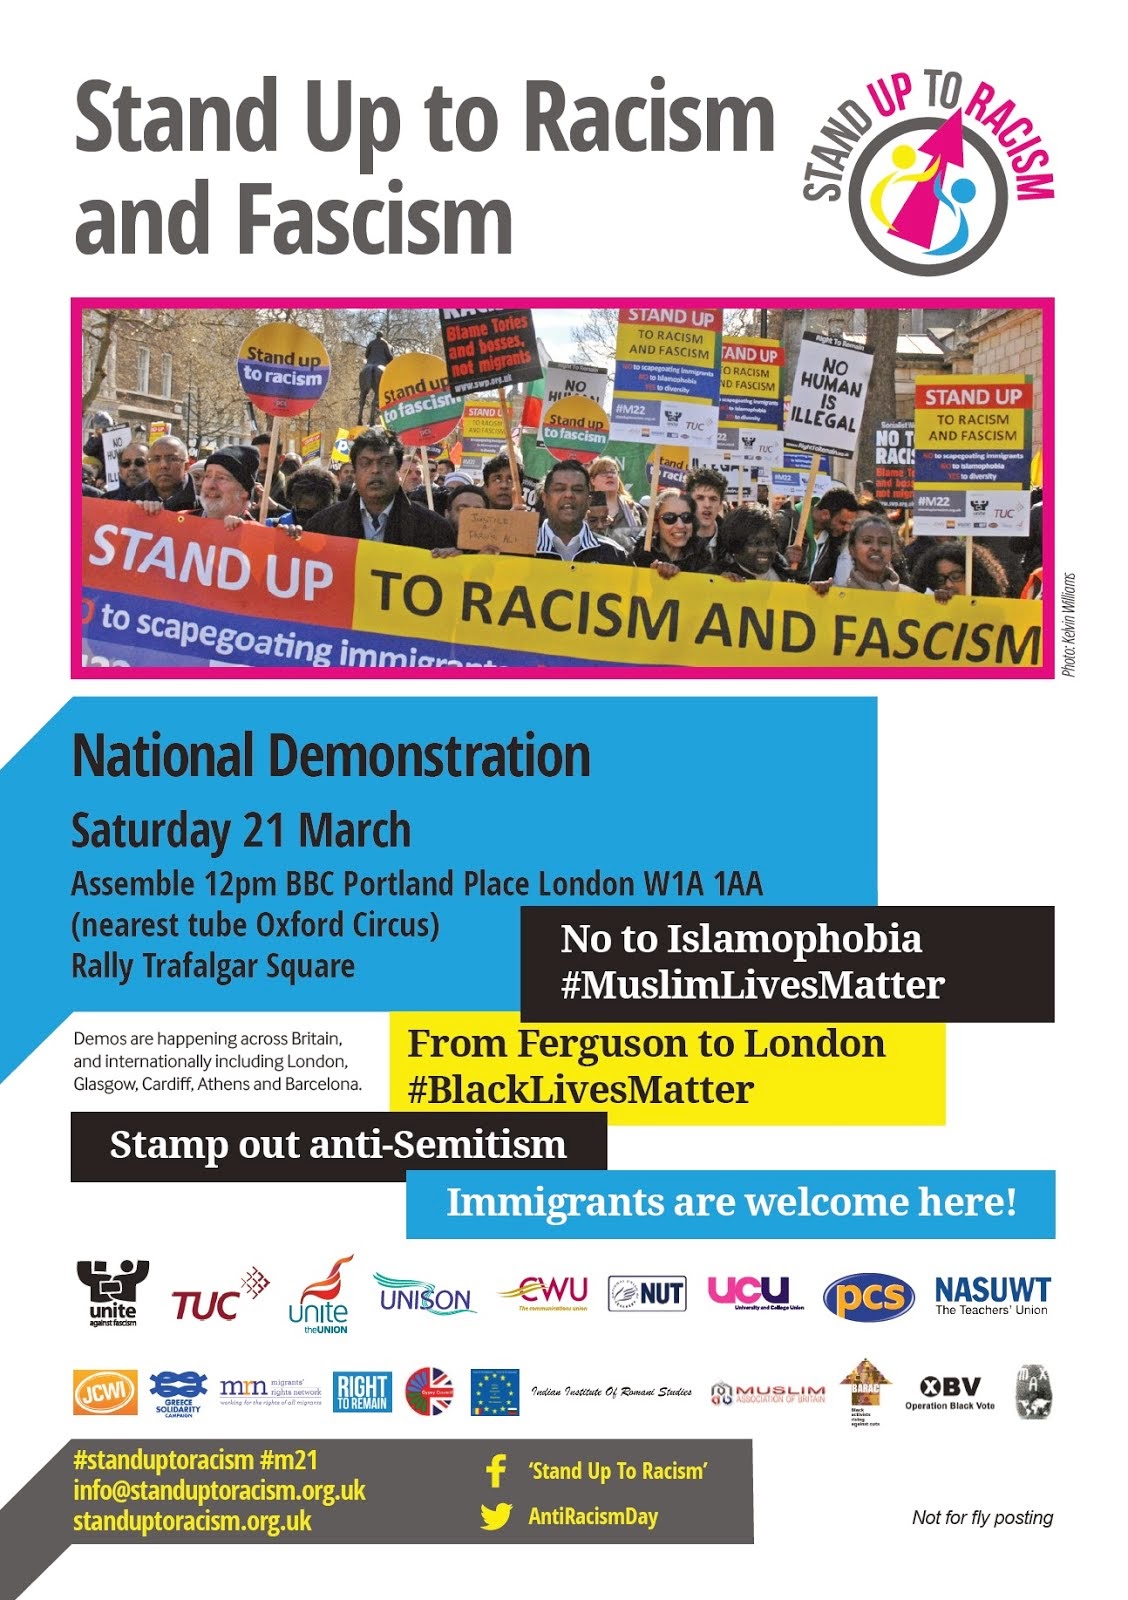 Stand up to racism and fascism London, Saturday 21 March